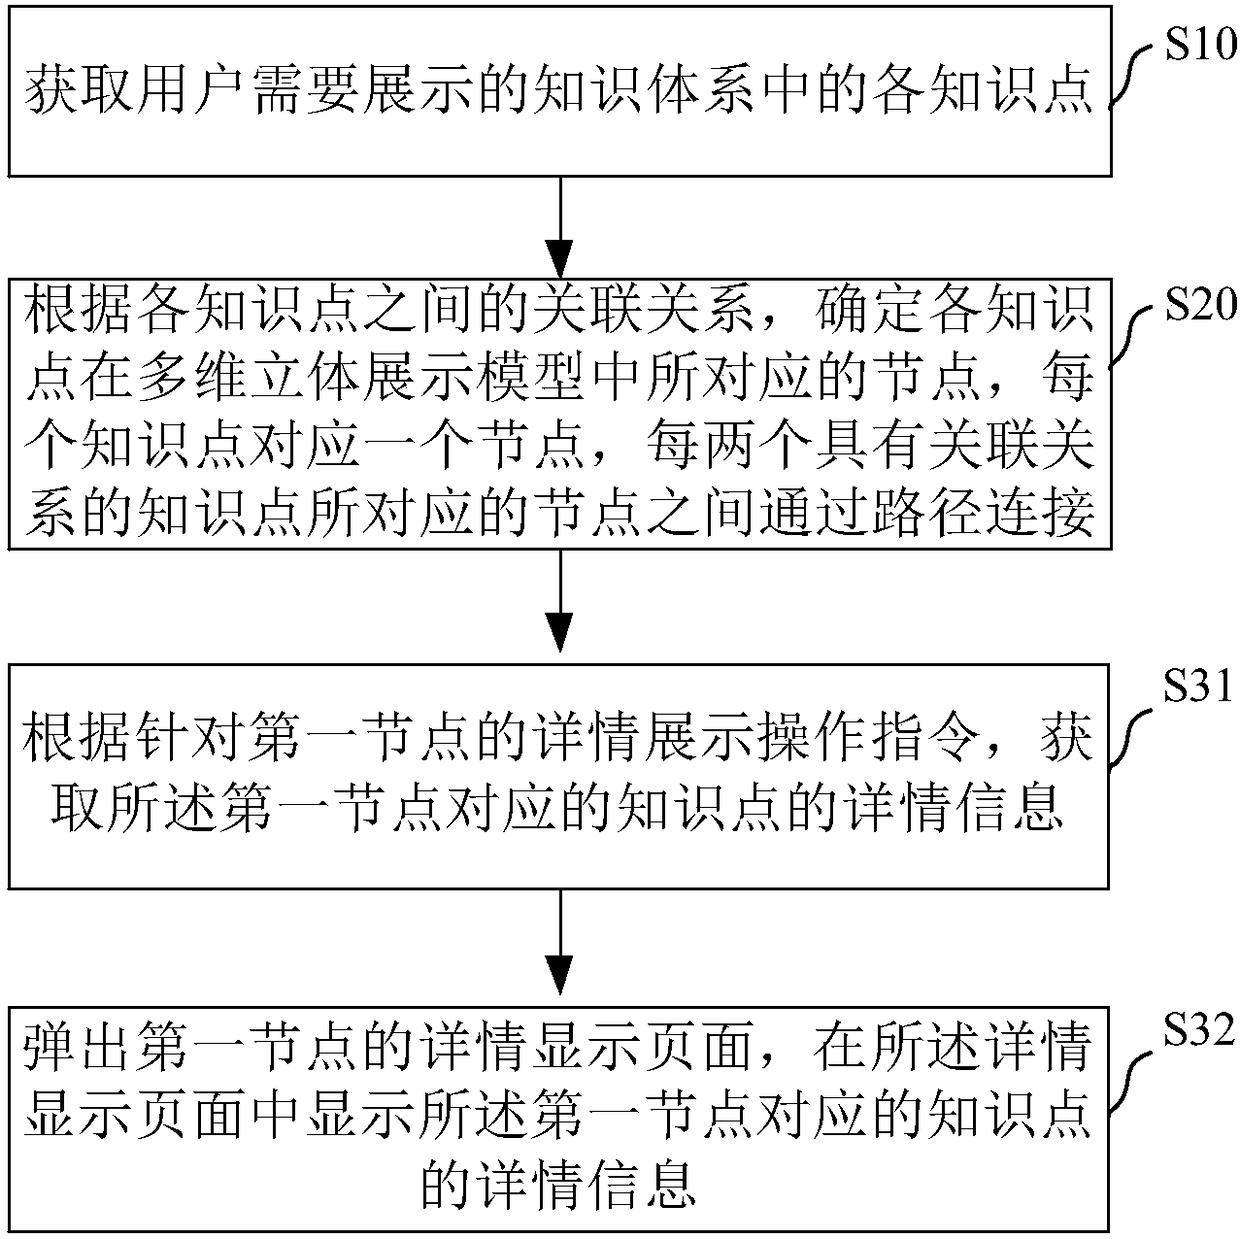 Multidimensional knowledge system stereoscopic display method and apparatus